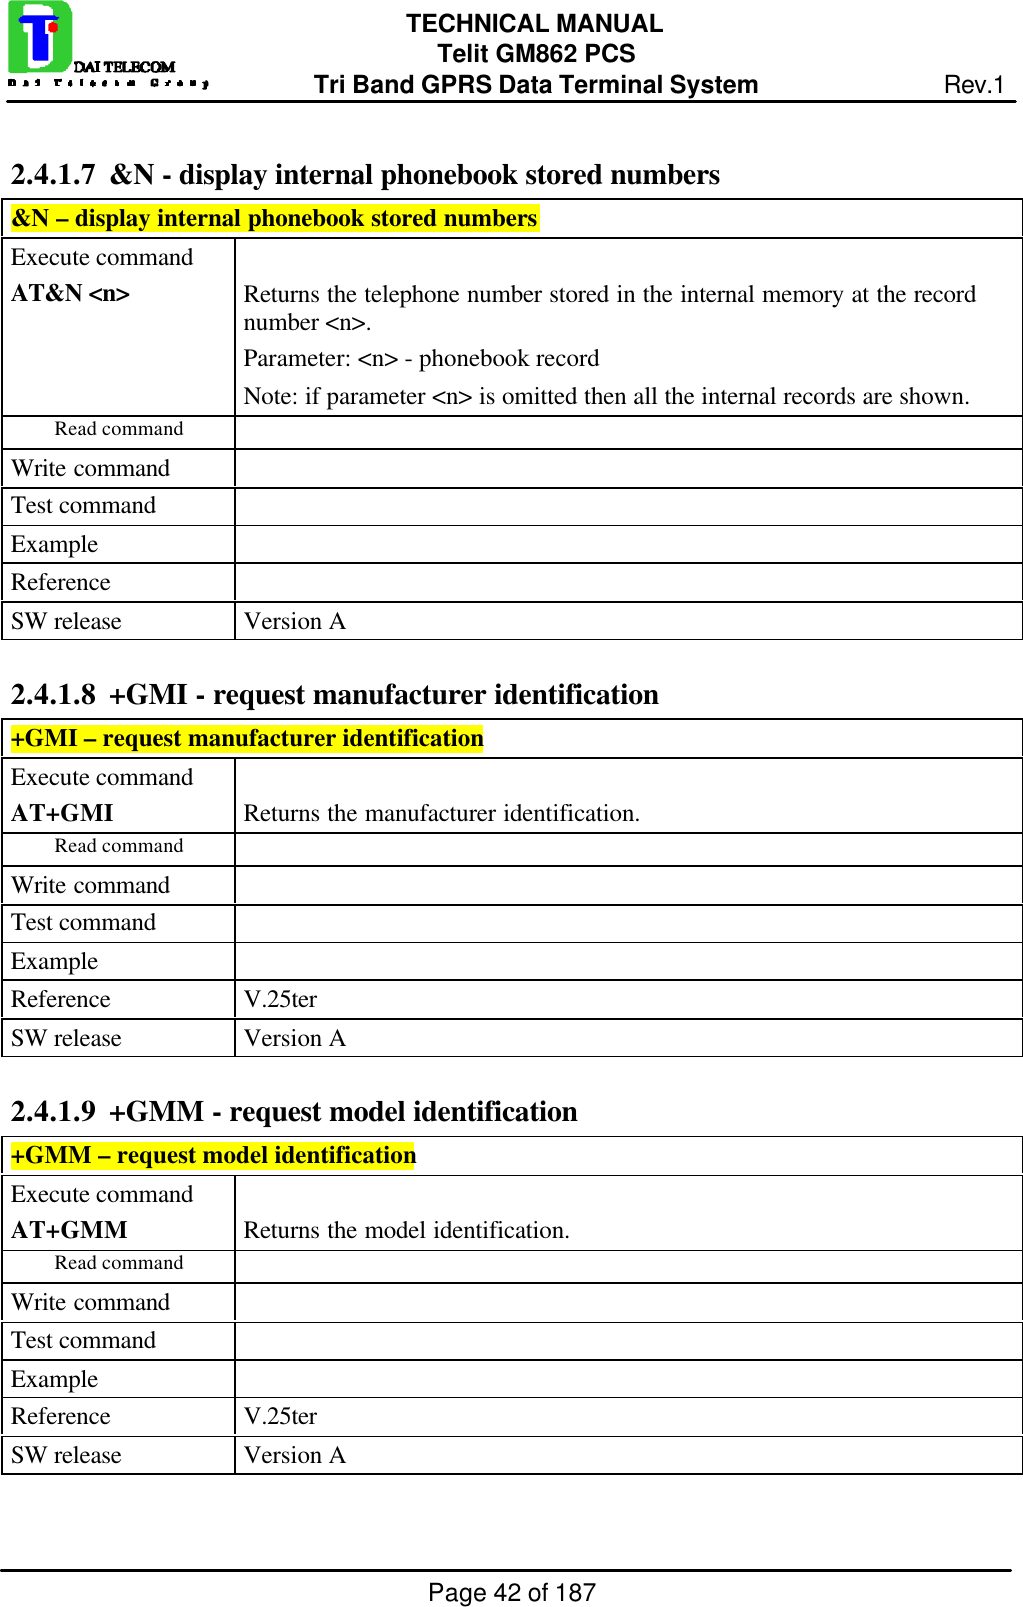 Page 42 of 187TECHNICAL MANUALTelit GM862 PCSTri Band GPRS Data Terminal System Rev.12.4.1.7  &amp;N - display internal phonebook stored numbers&amp;N – display internal phonebook stored numbersExecute commandAT&amp;N &lt;n&gt; Returns the telephone number stored in the internal memory at the recordnumber &lt;n&gt;.Parameter: &lt;n&gt; - phonebook recordNote: if parameter &lt;n&gt; is omitted then all the internal records are shown.Read commandWrite commandTest commandExampleReferenceSW release Version A2.4.1.8  +GMI - request manufacturer identification+GMI – request manufacturer identificationExecute commandAT+GMI Returns the manufacturer identification.Read commandWrite commandTest commandExampleReference V.25terSW release Version A2.4.1.9  +GMM - request model identification+GMM – request model identificationExecute commandAT+GMM Returns the model identification.Read commandWrite commandTest commandExampleReference V.25terSW release Version A